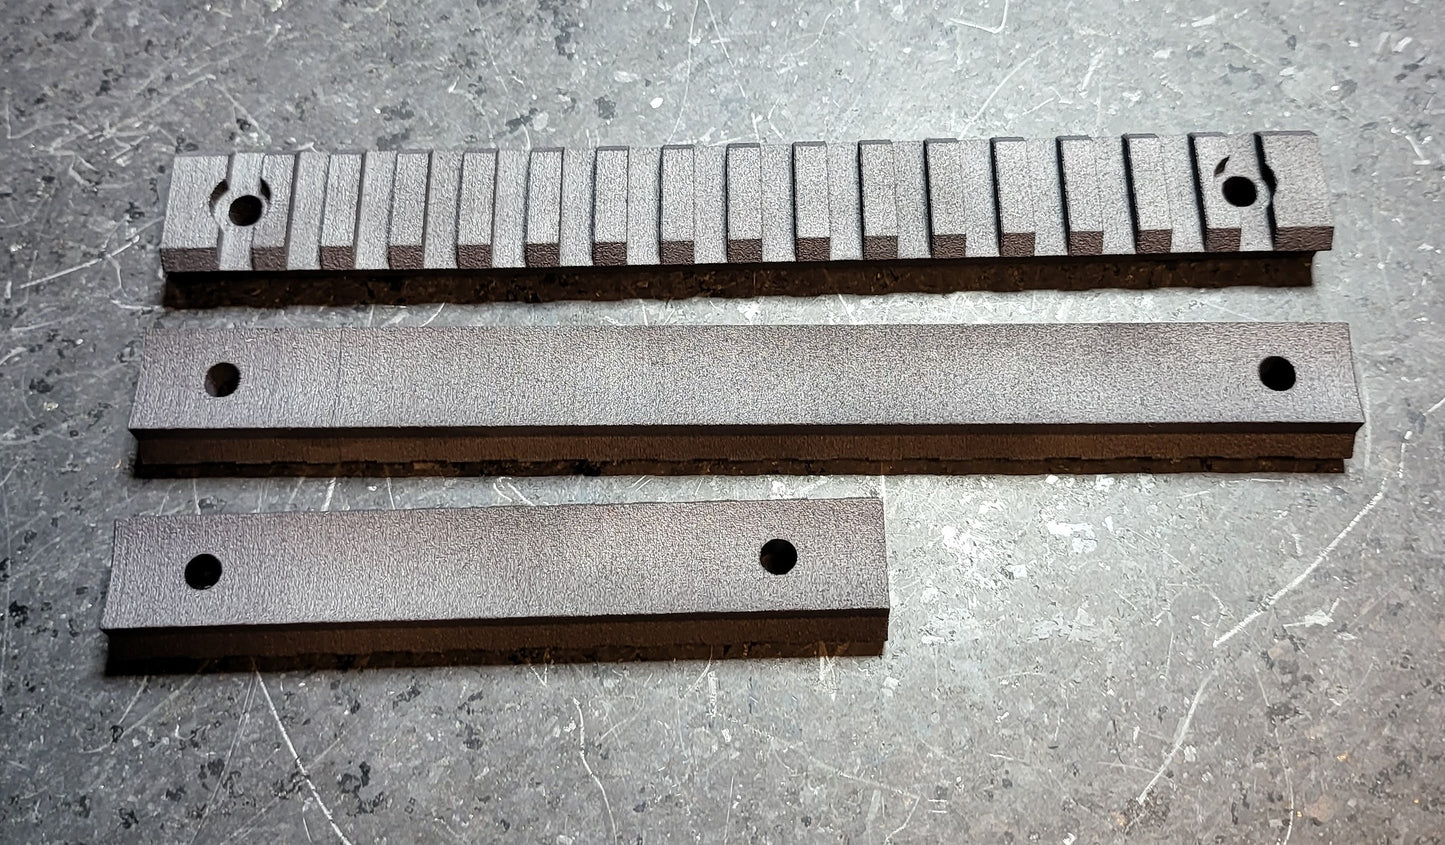 Picatinny Rail Panels for A&K M4 GR-300 (2 sides and bottom)